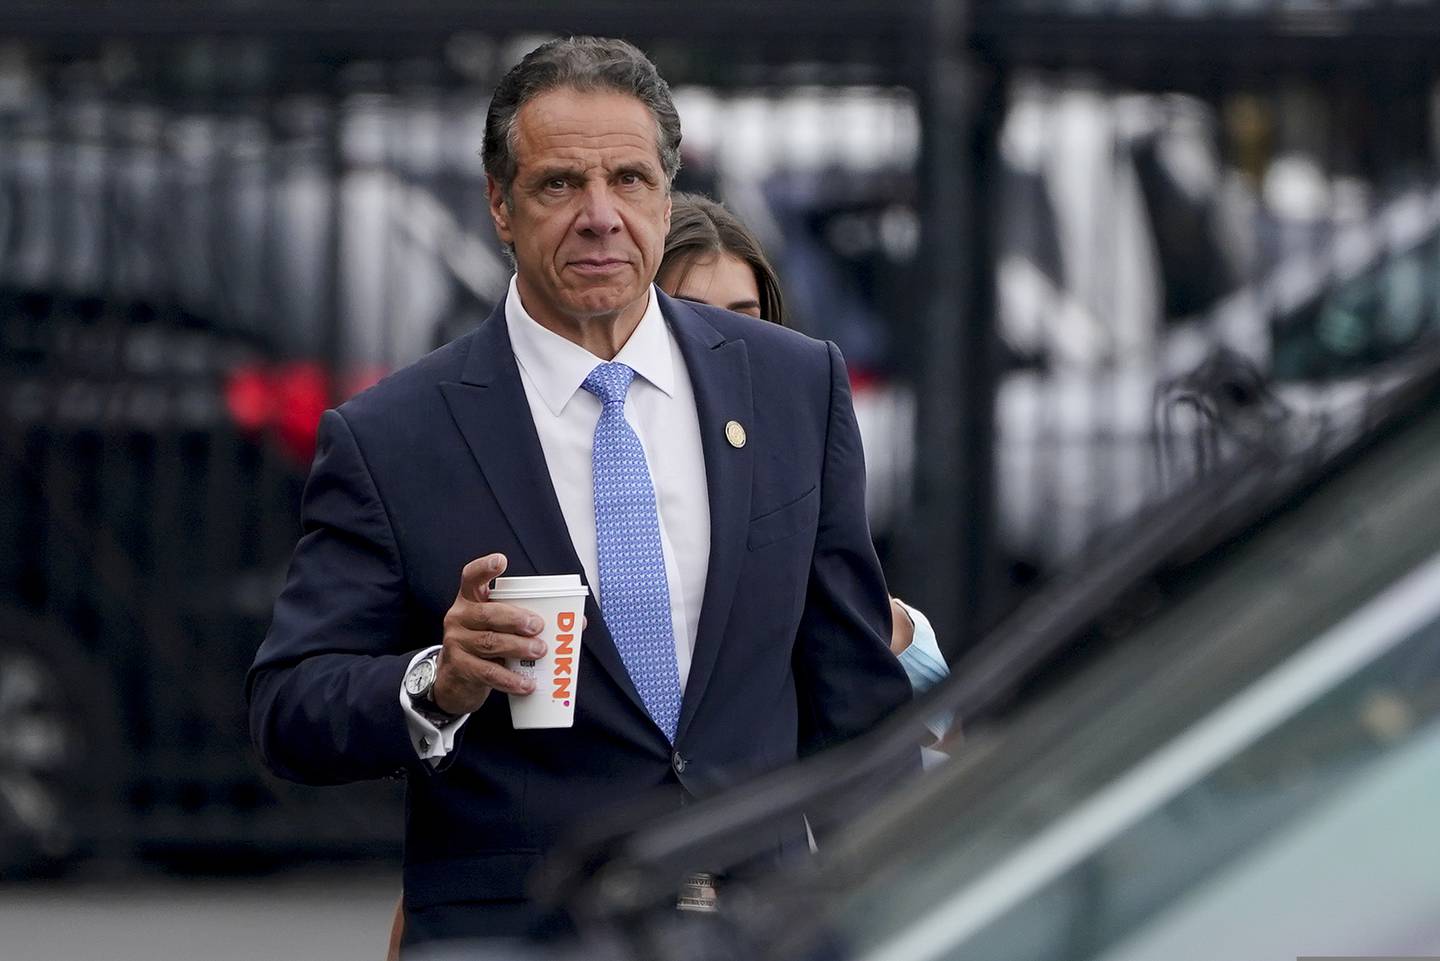 New York Gov Andrew Cuomo Resigns Over Accusations Of Sexual Harassment